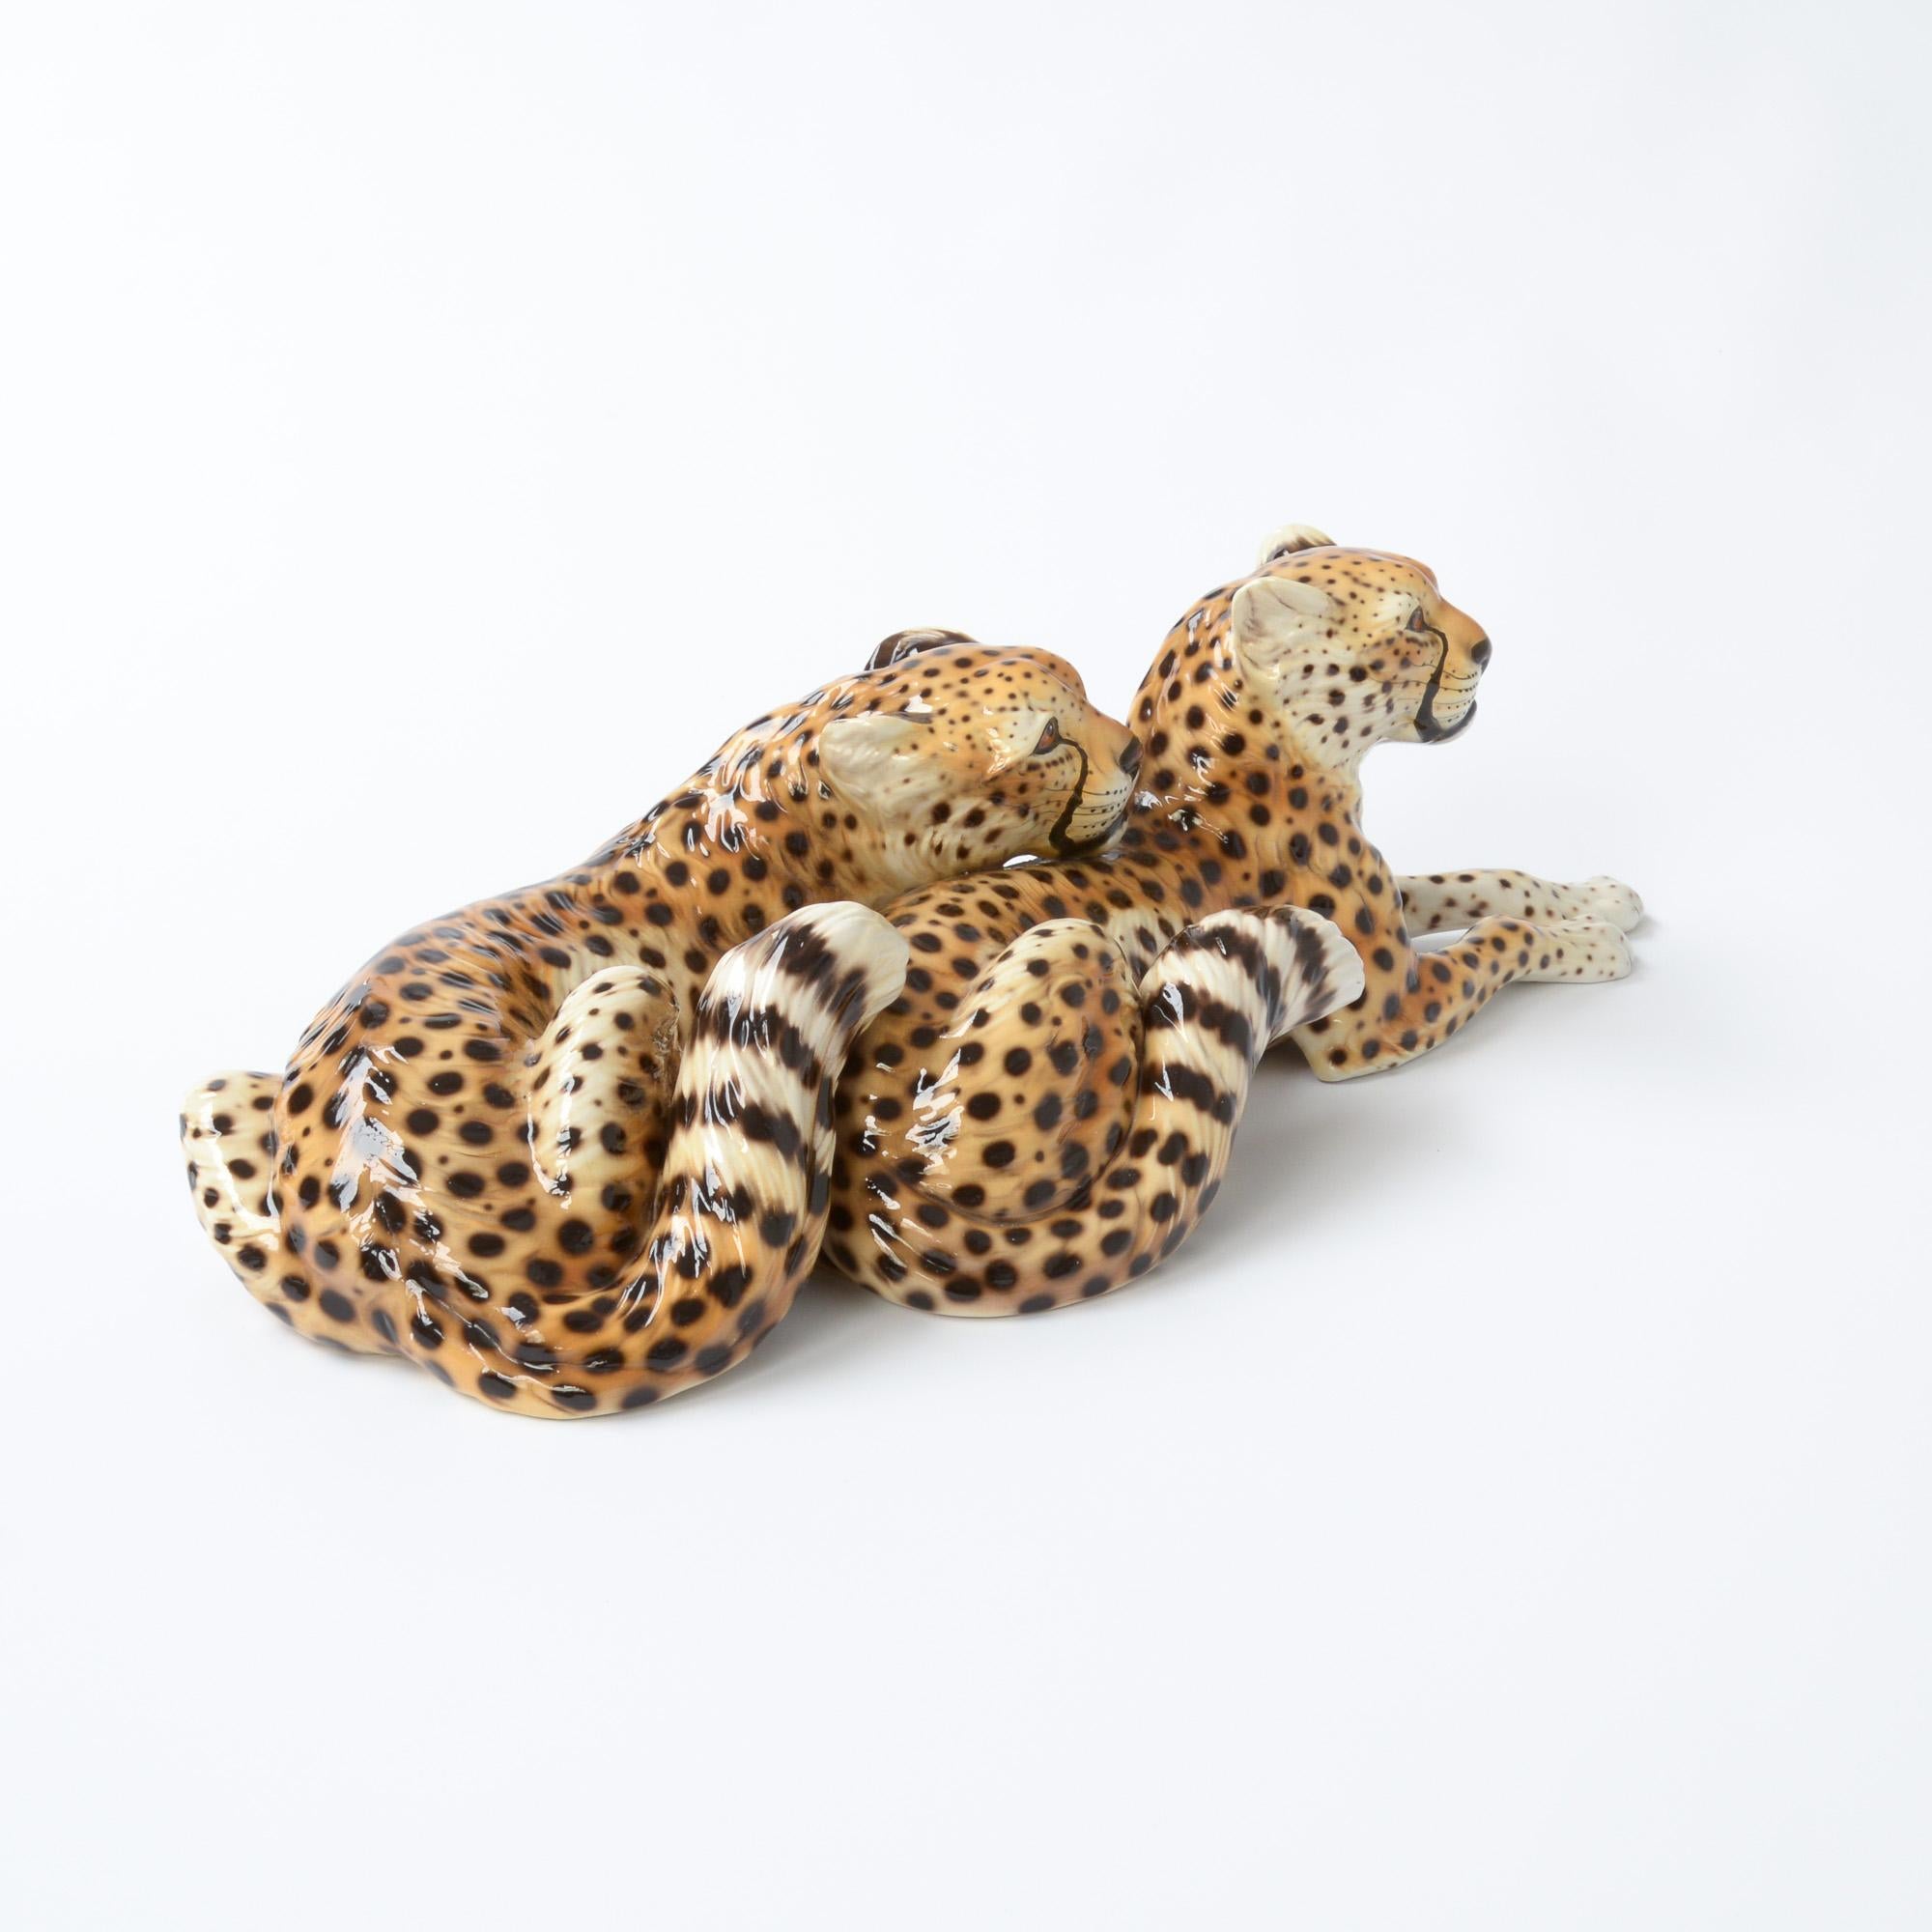 This porcelain sculpture of reclining cheetahs is made by the Italian artist Ronzan. It can be dated in the 1950s.
Giovanni Ronzan and his brother founded the Ronzan factory circa 1940s shortly after he had left his job as chief painter and ceramic